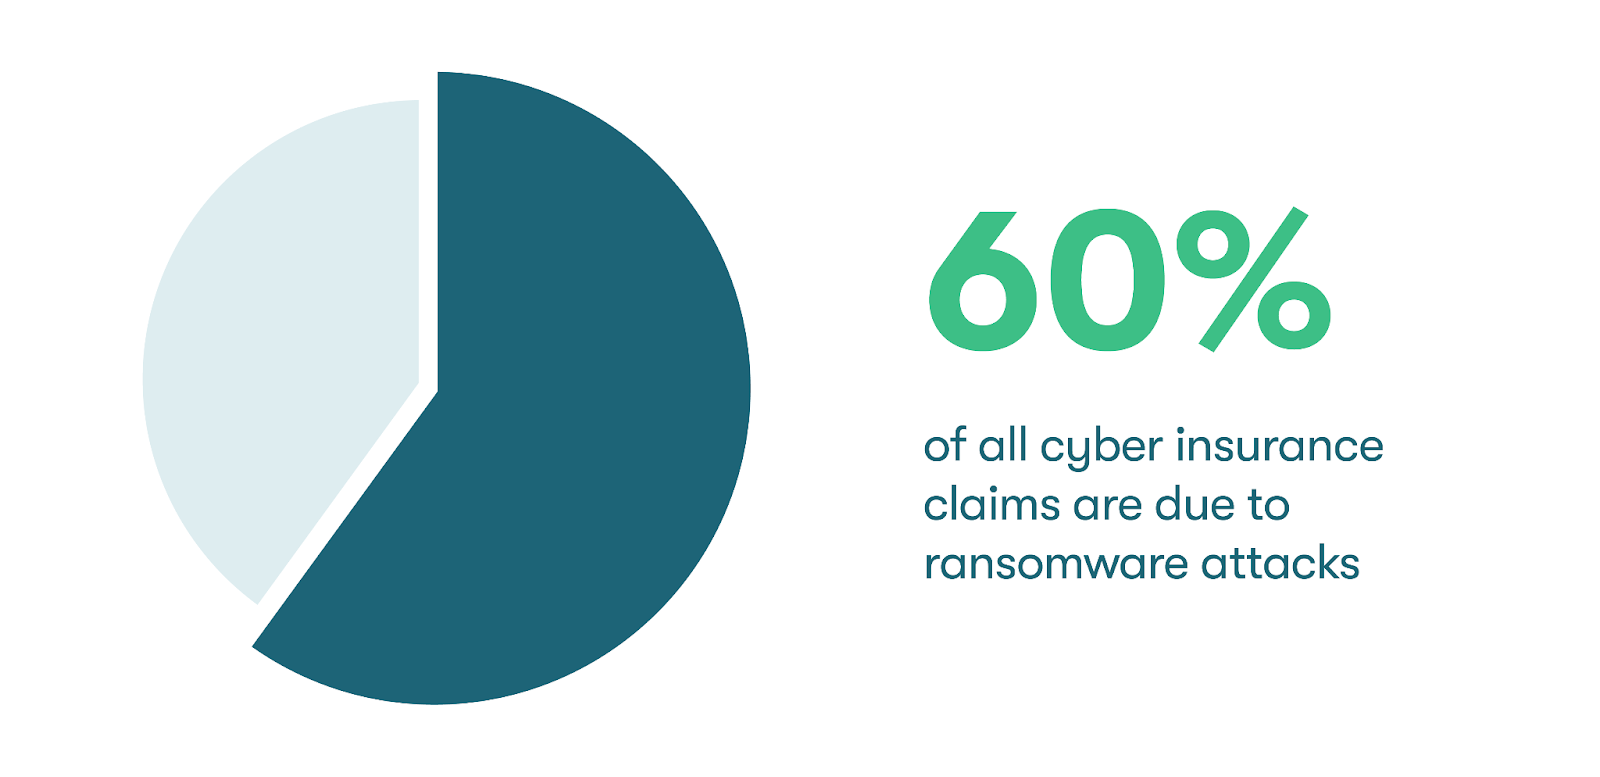 Graphic of a pie chart to represent the 60% of cyber insurance claims that are due to ransomware attacks.